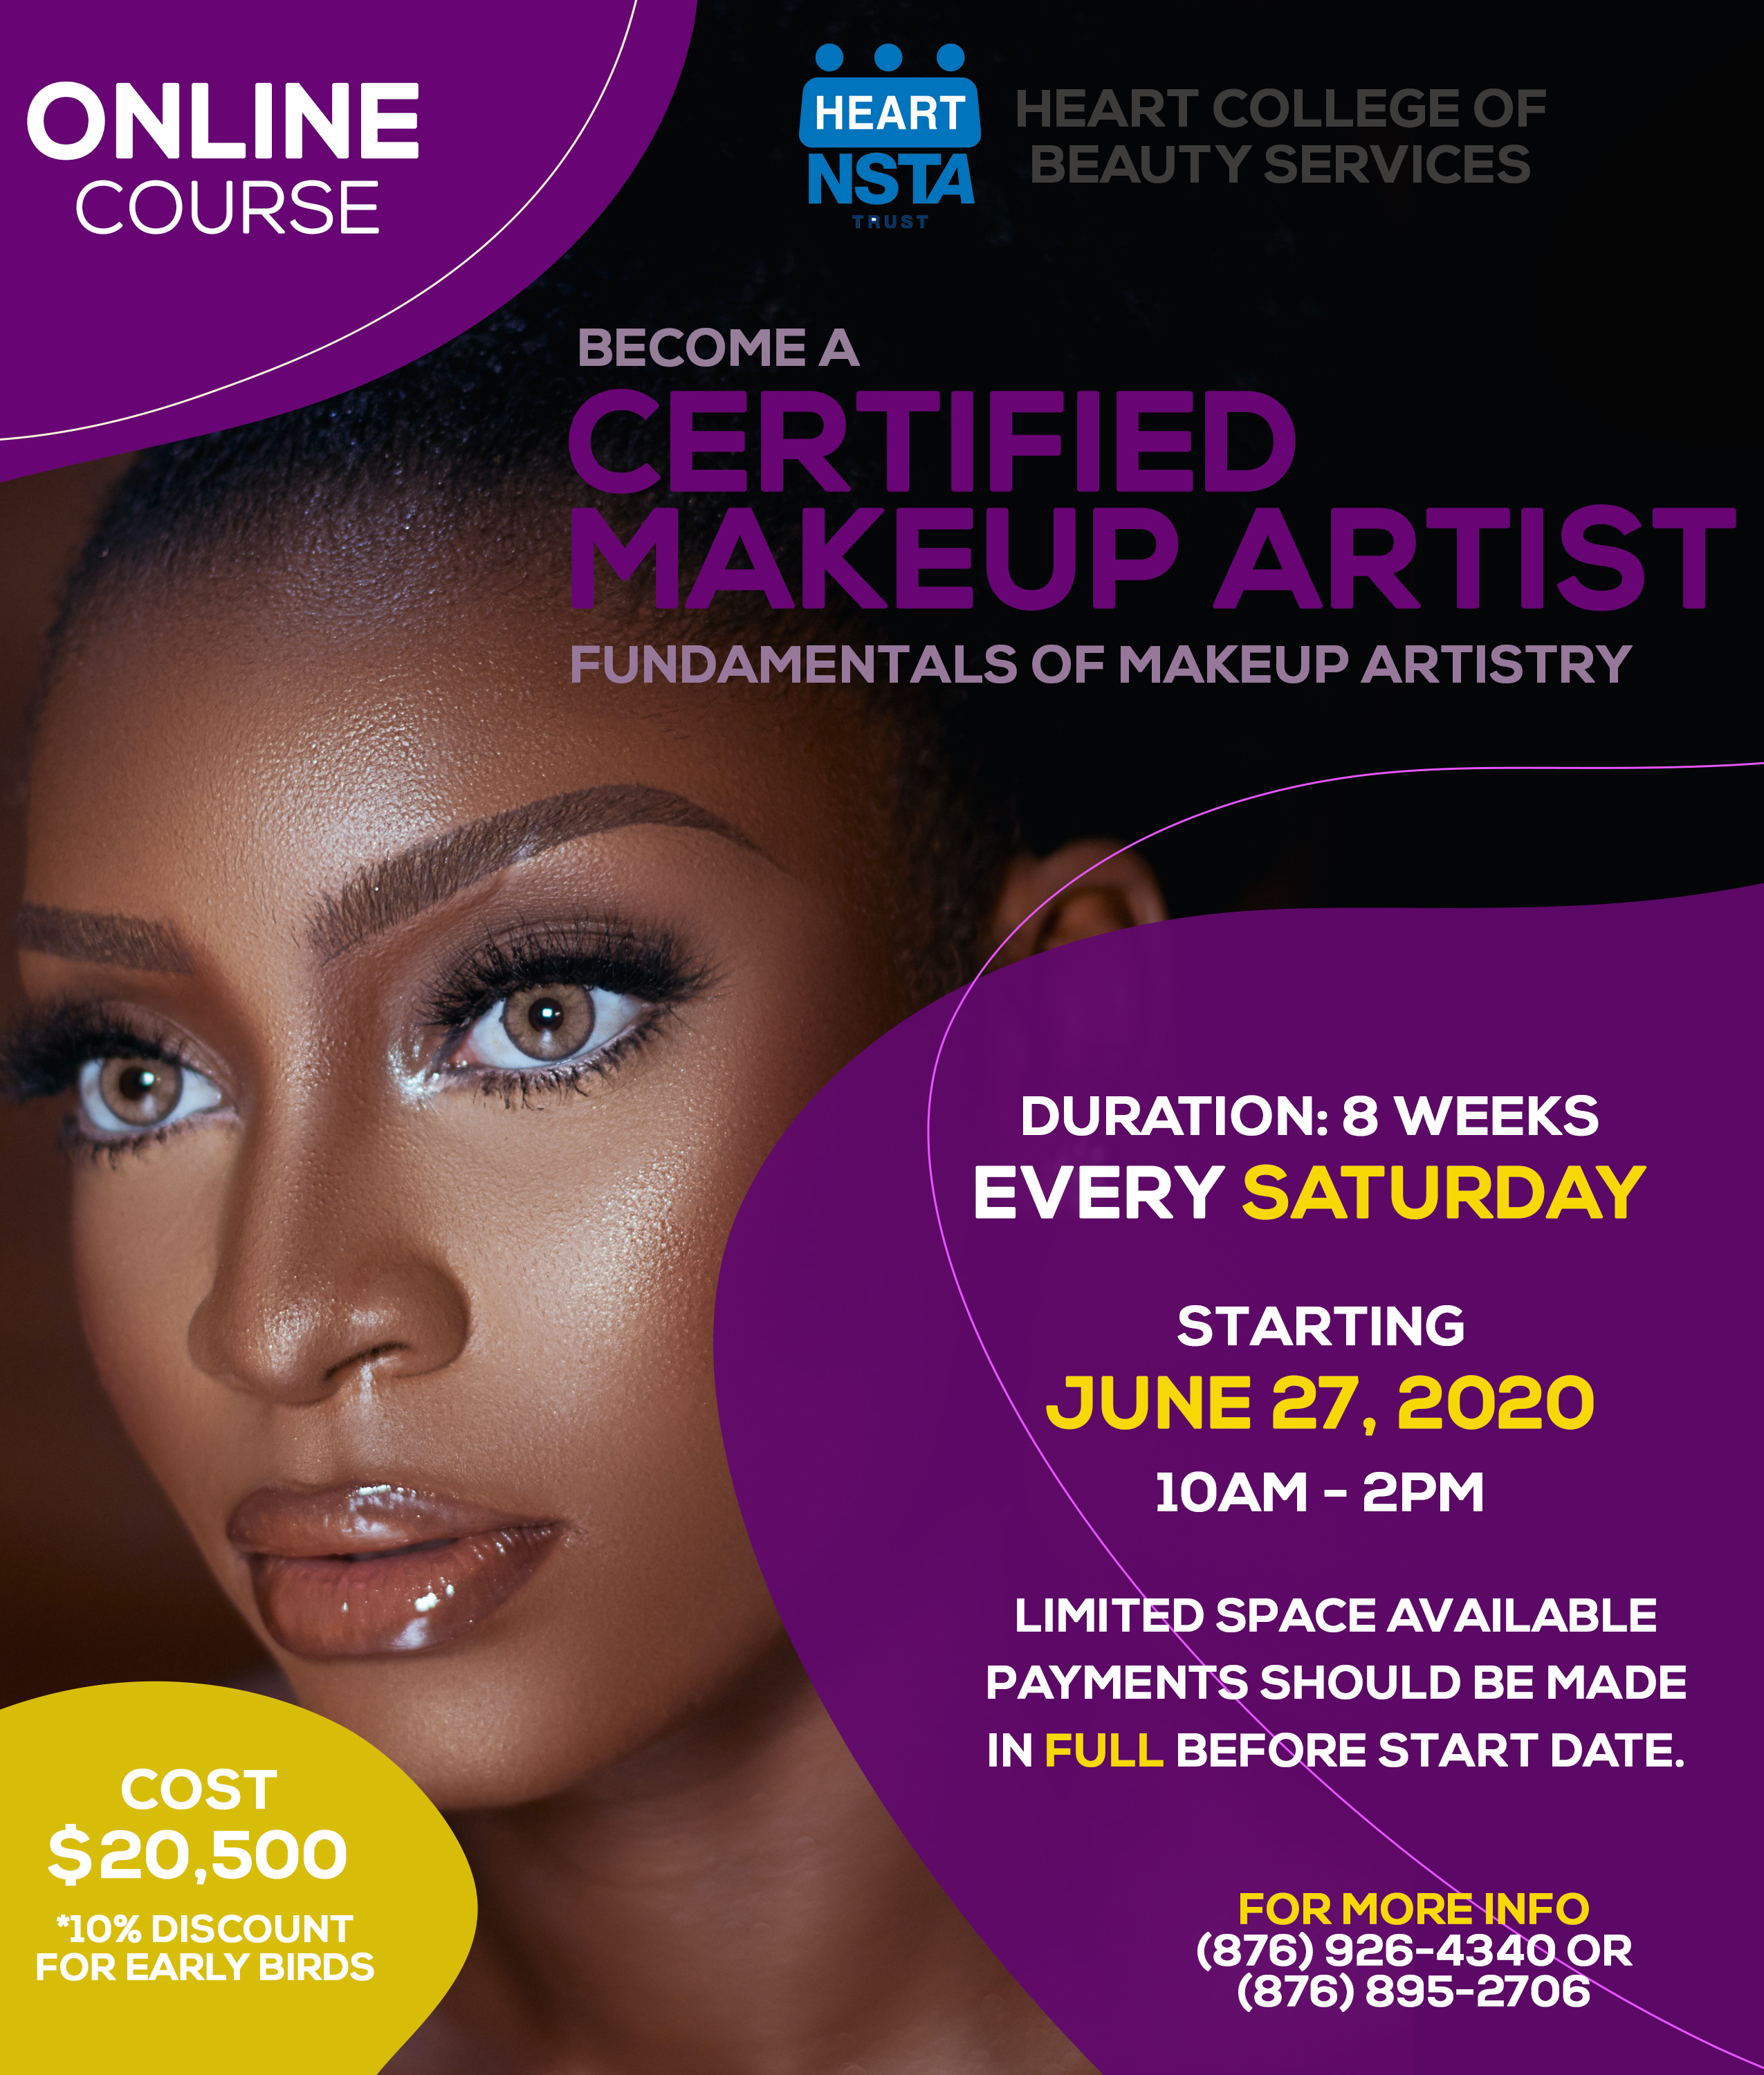 HEART/NSTA Trust on Twitter: "Become a certified makeup with the HEART College of Beauty of Makeup Artistry Course. Apply online today! https://t.co/knlP6KD7Pz https://t.co/pQ2uvcuf7l" / Twitter